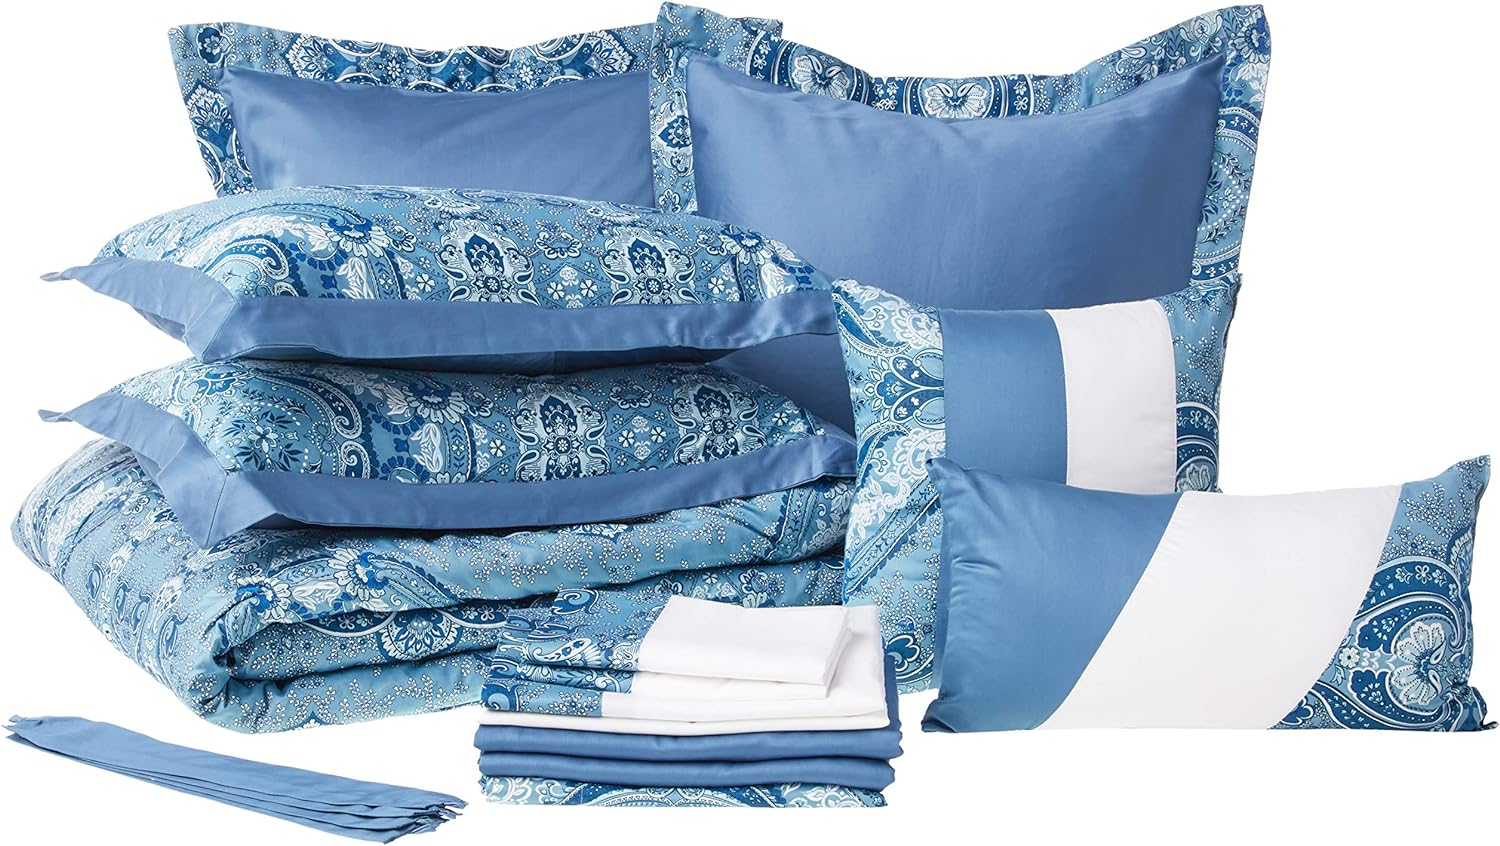 Tribeca Living Room in A Bag 24 Piece Set Includes Oversized Comforter, Shams, Bedskirt, Curtains, Valance, Decorative Cushions and Bed Sheets, Queen, Atlantis